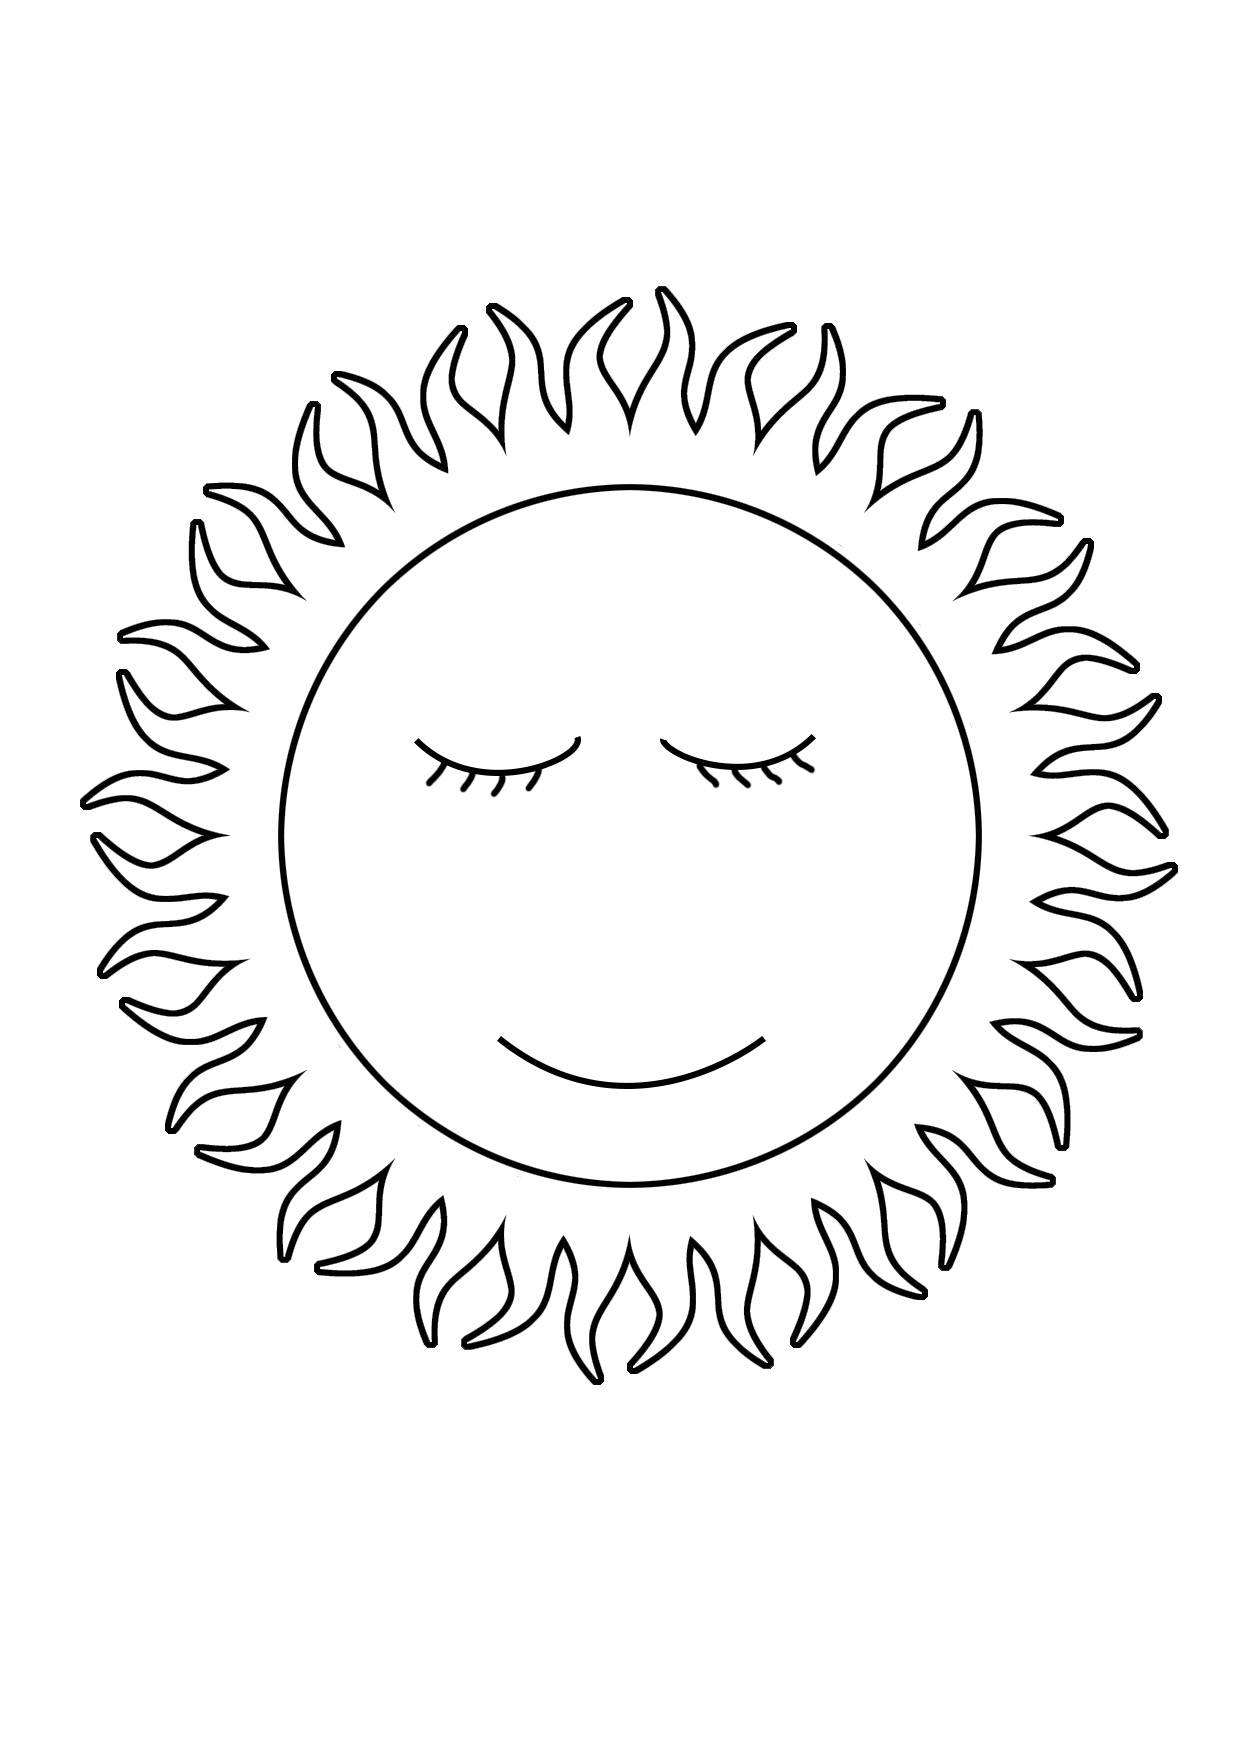 Download Summer Coloring Pages to Print